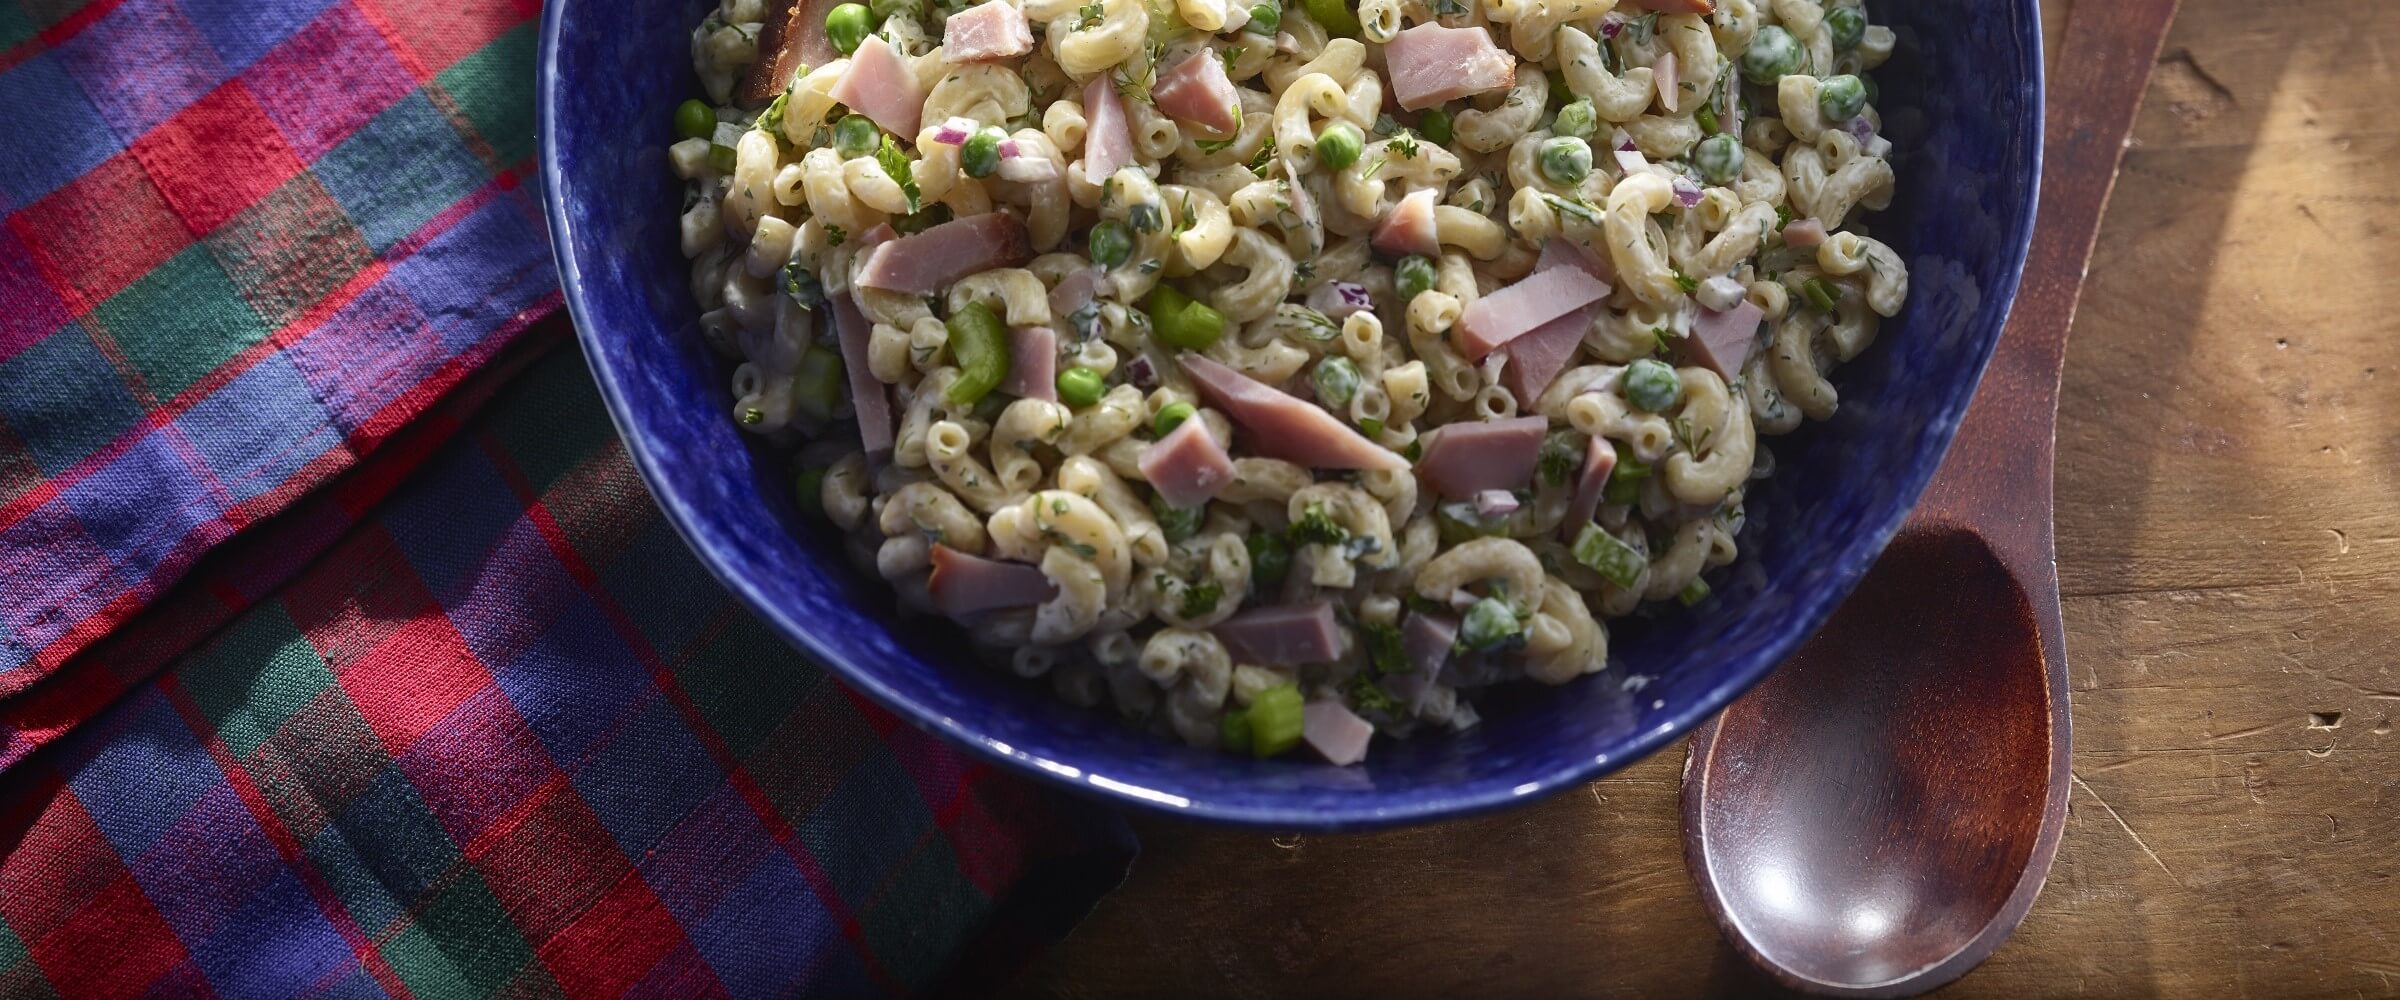 classic macaroni salad with ham in blue bowl with plaid napkin